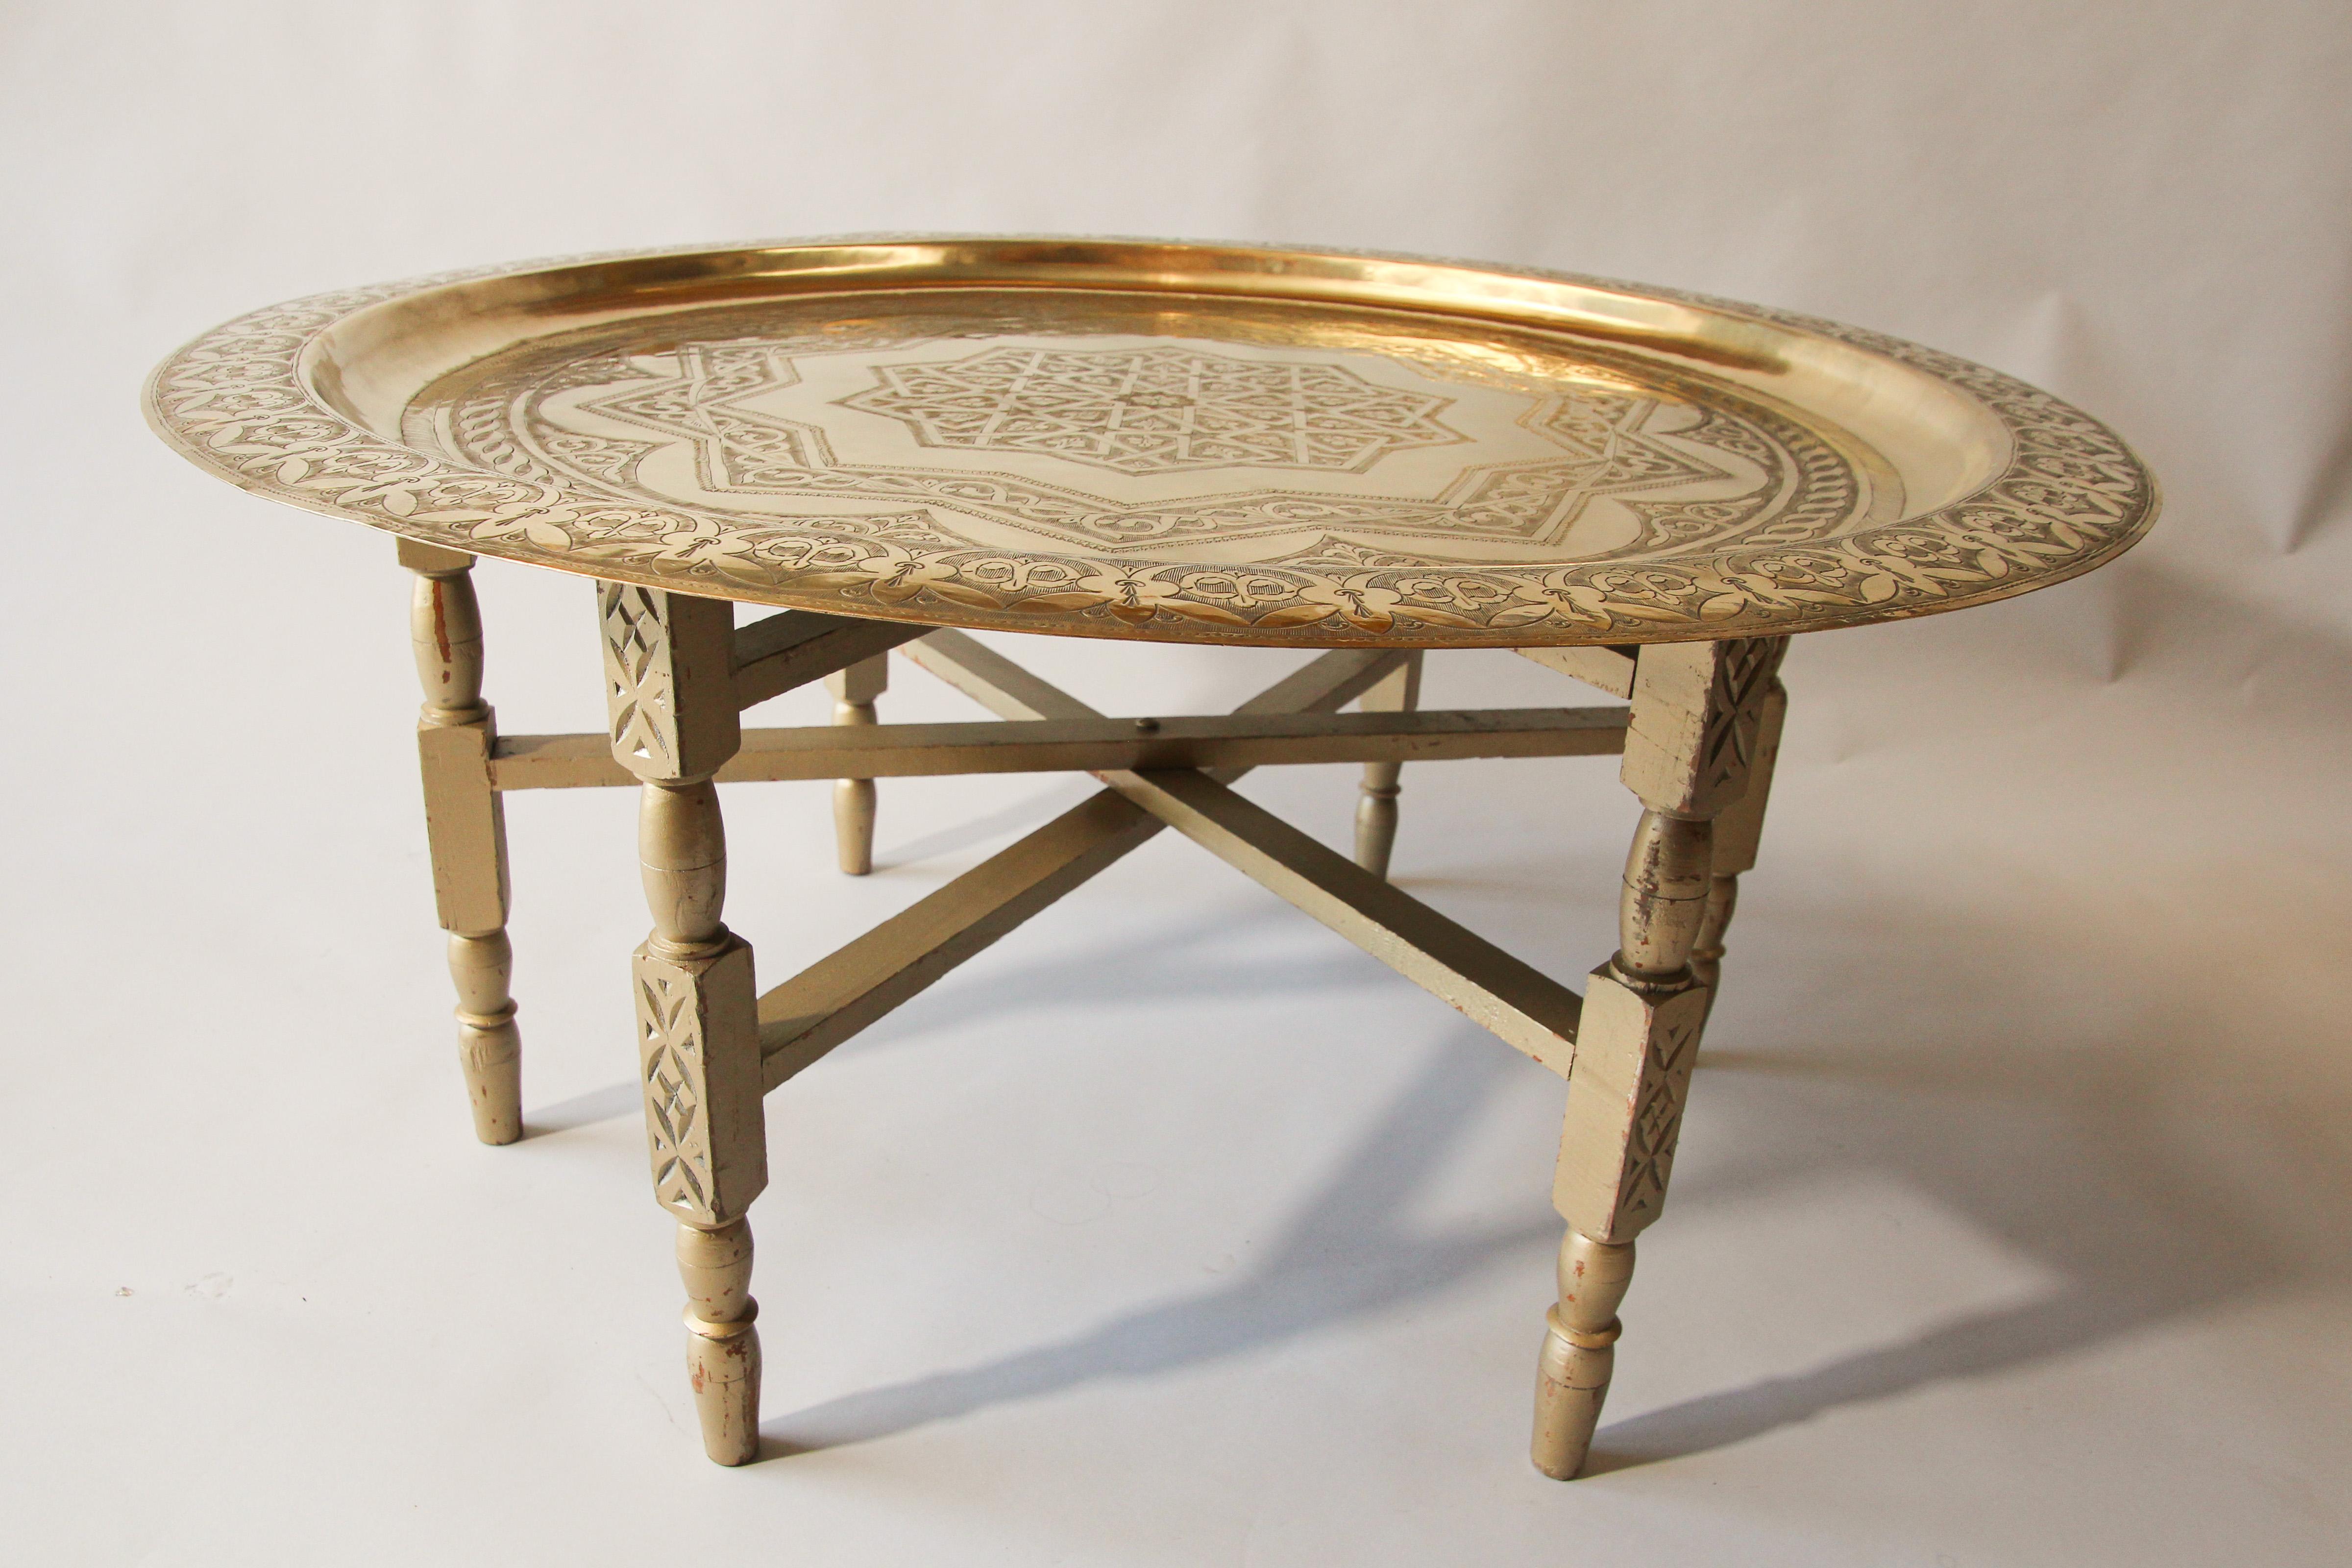 Islamic Moroccan Large Polished Brass Tray Table on Folding Stand 40 in.Diameter